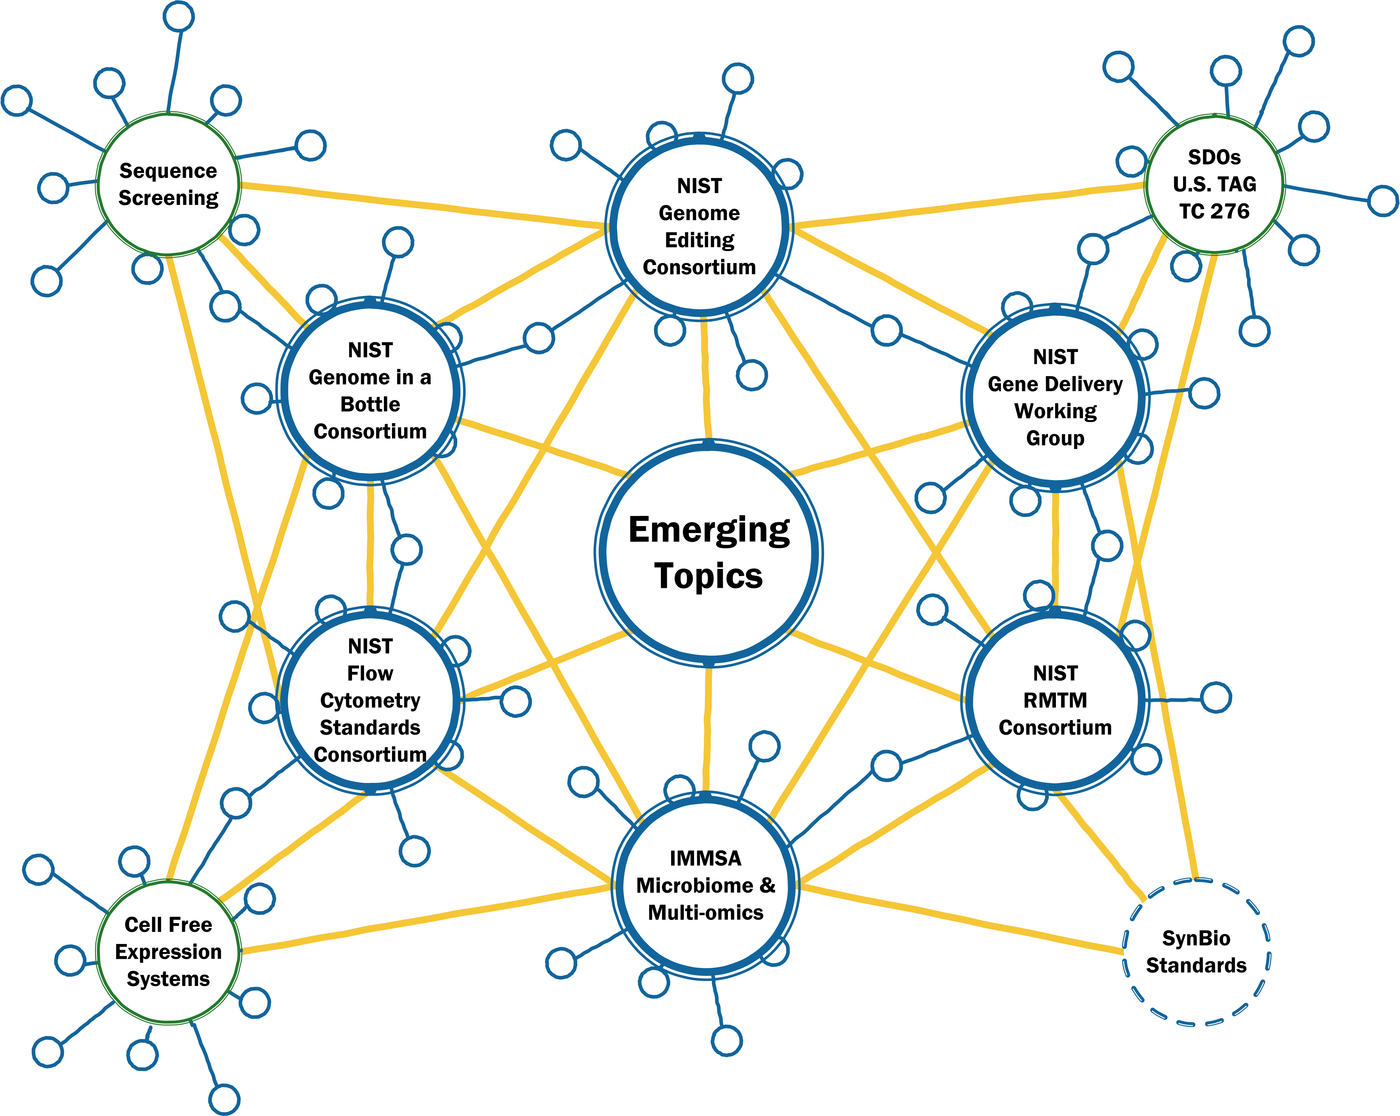 Illustrative network diagram with a central circle of emerging topics connected to six consortia that NIST either leads or contributes to with further connection to non-consortium activities.  Each consortium and activity connects to multiple participants.